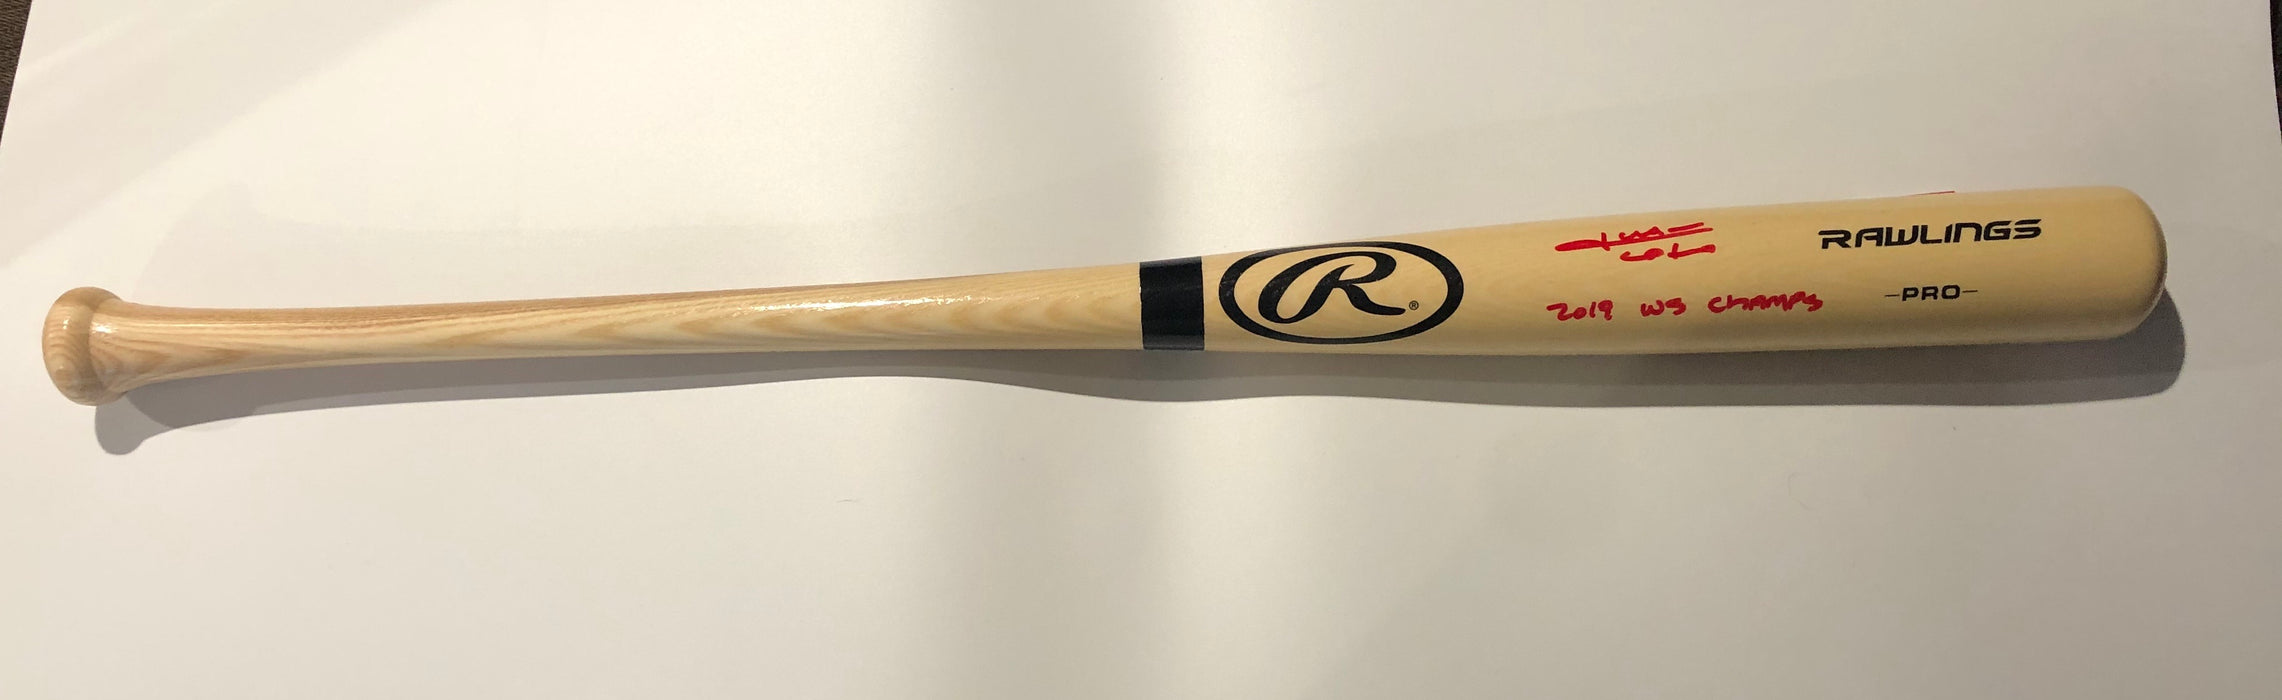 Juan Soto Autographed Rawlings Pro Model Bat with 2019 WS Champs Inscription (Beckett)